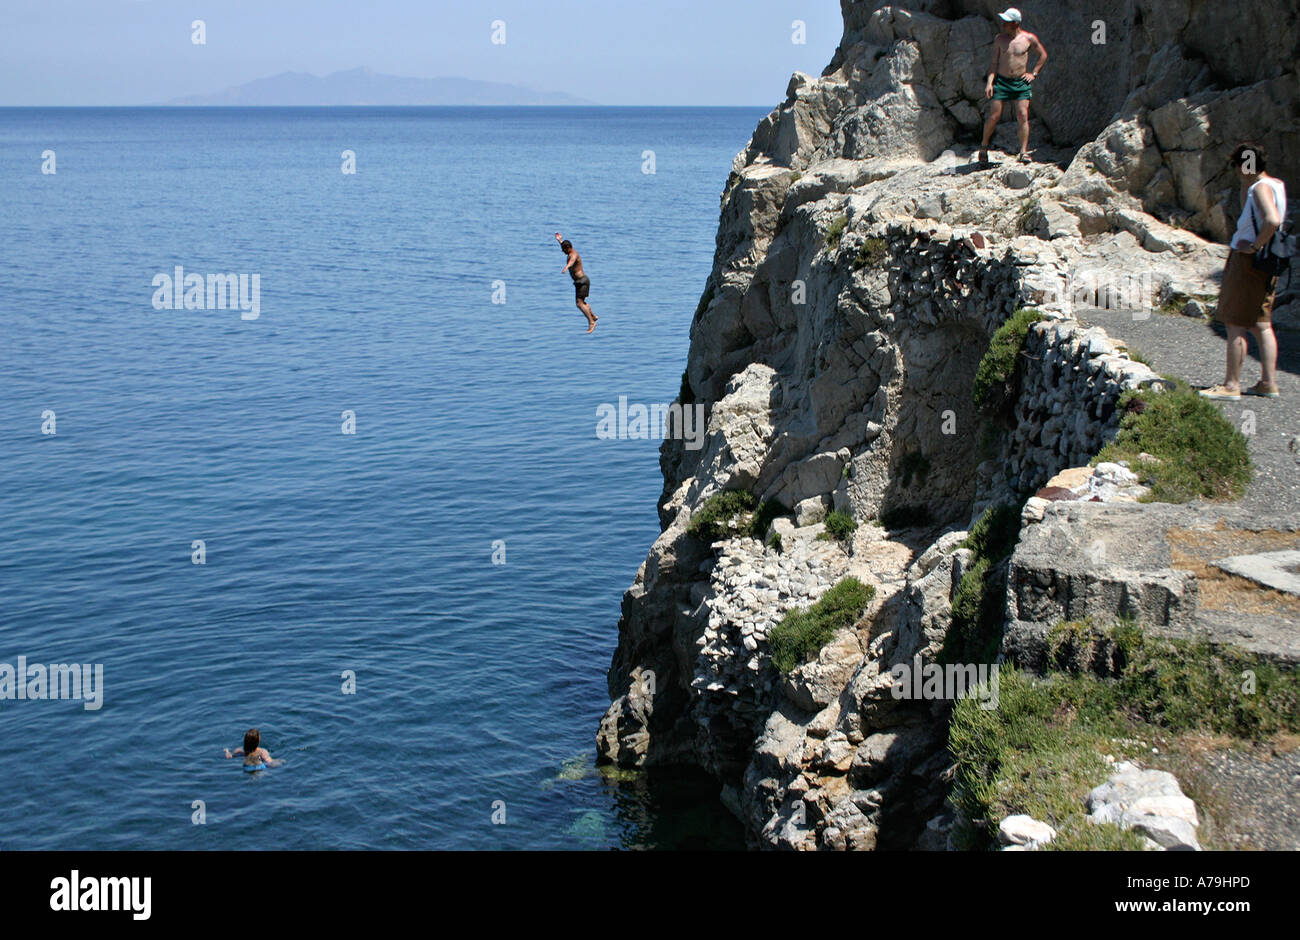 Refreshing Jump: A young man jumps from the cliffs a the end of Kamari beach into the dark blue water A woman has just preceded Stock Photo